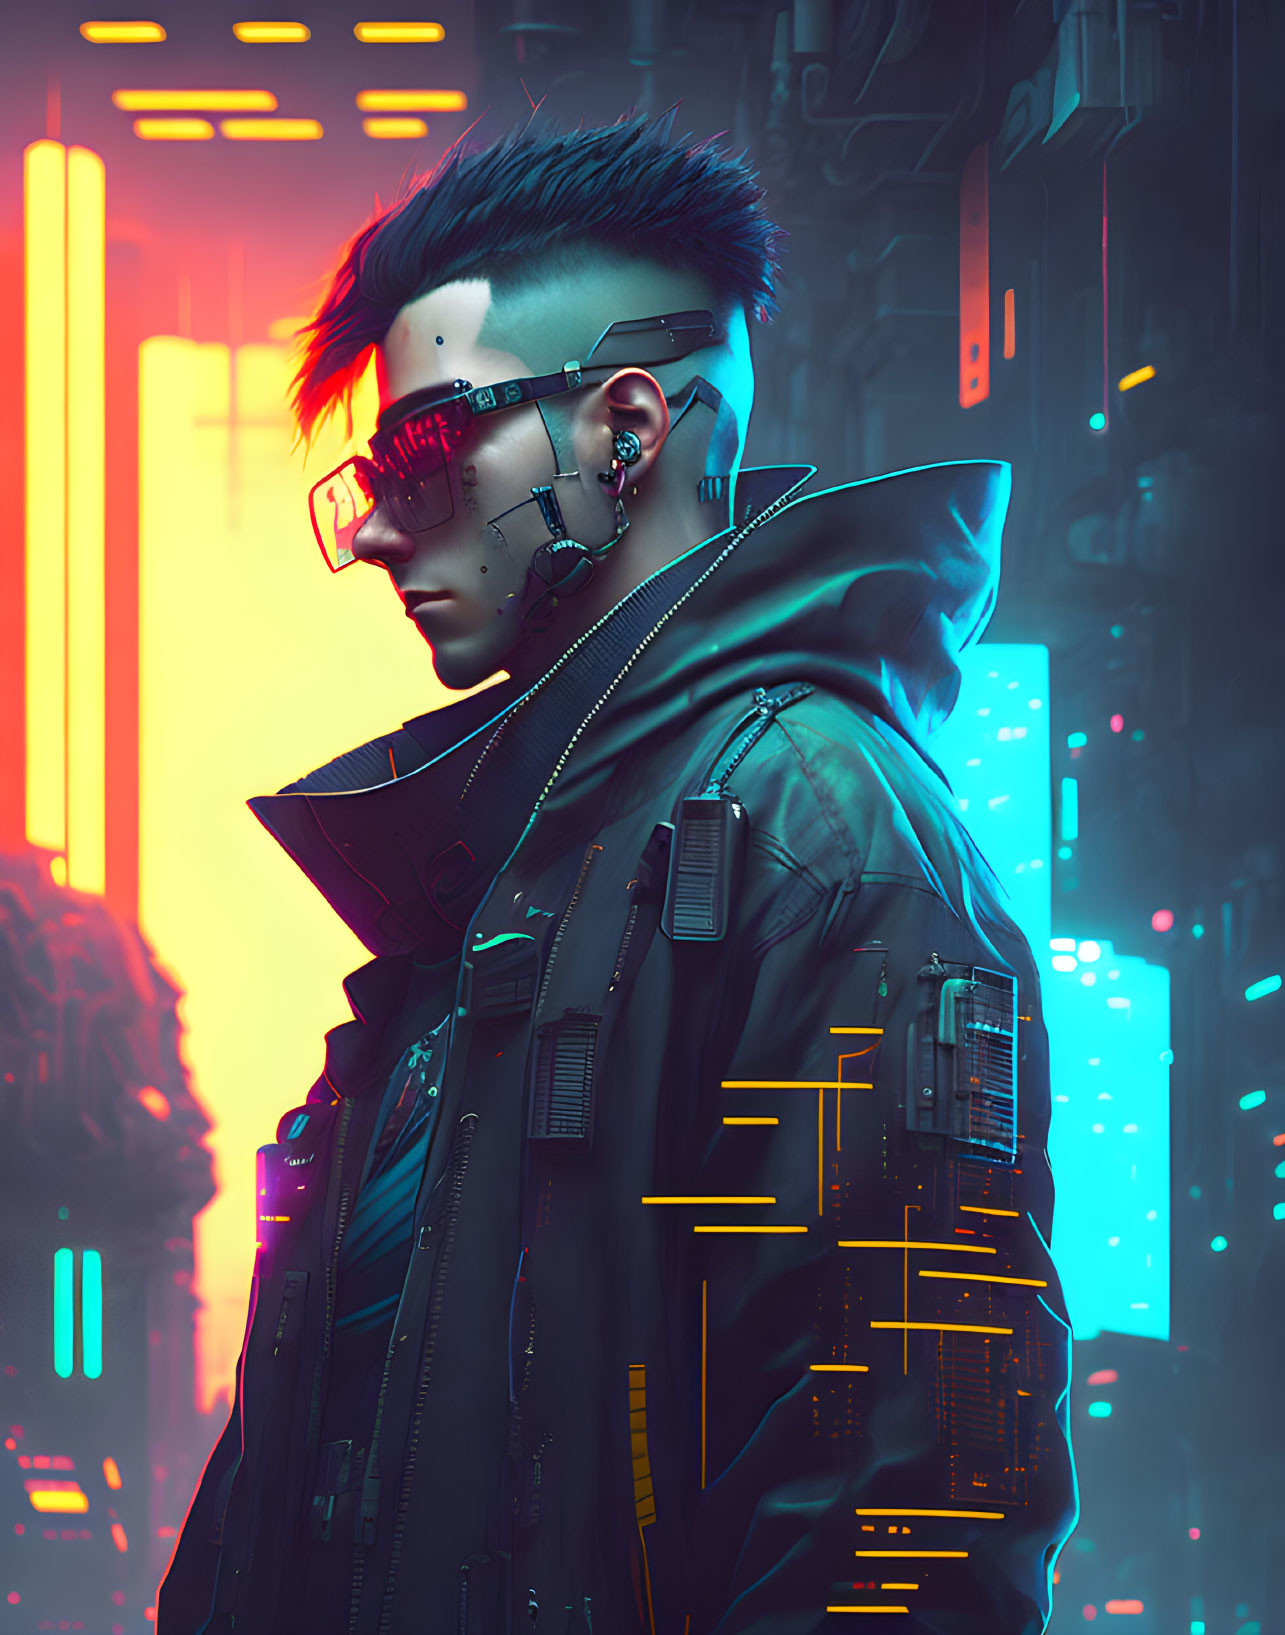 Futuristic cyberpunk character with augmented reality glasses and mohawk hairstyle